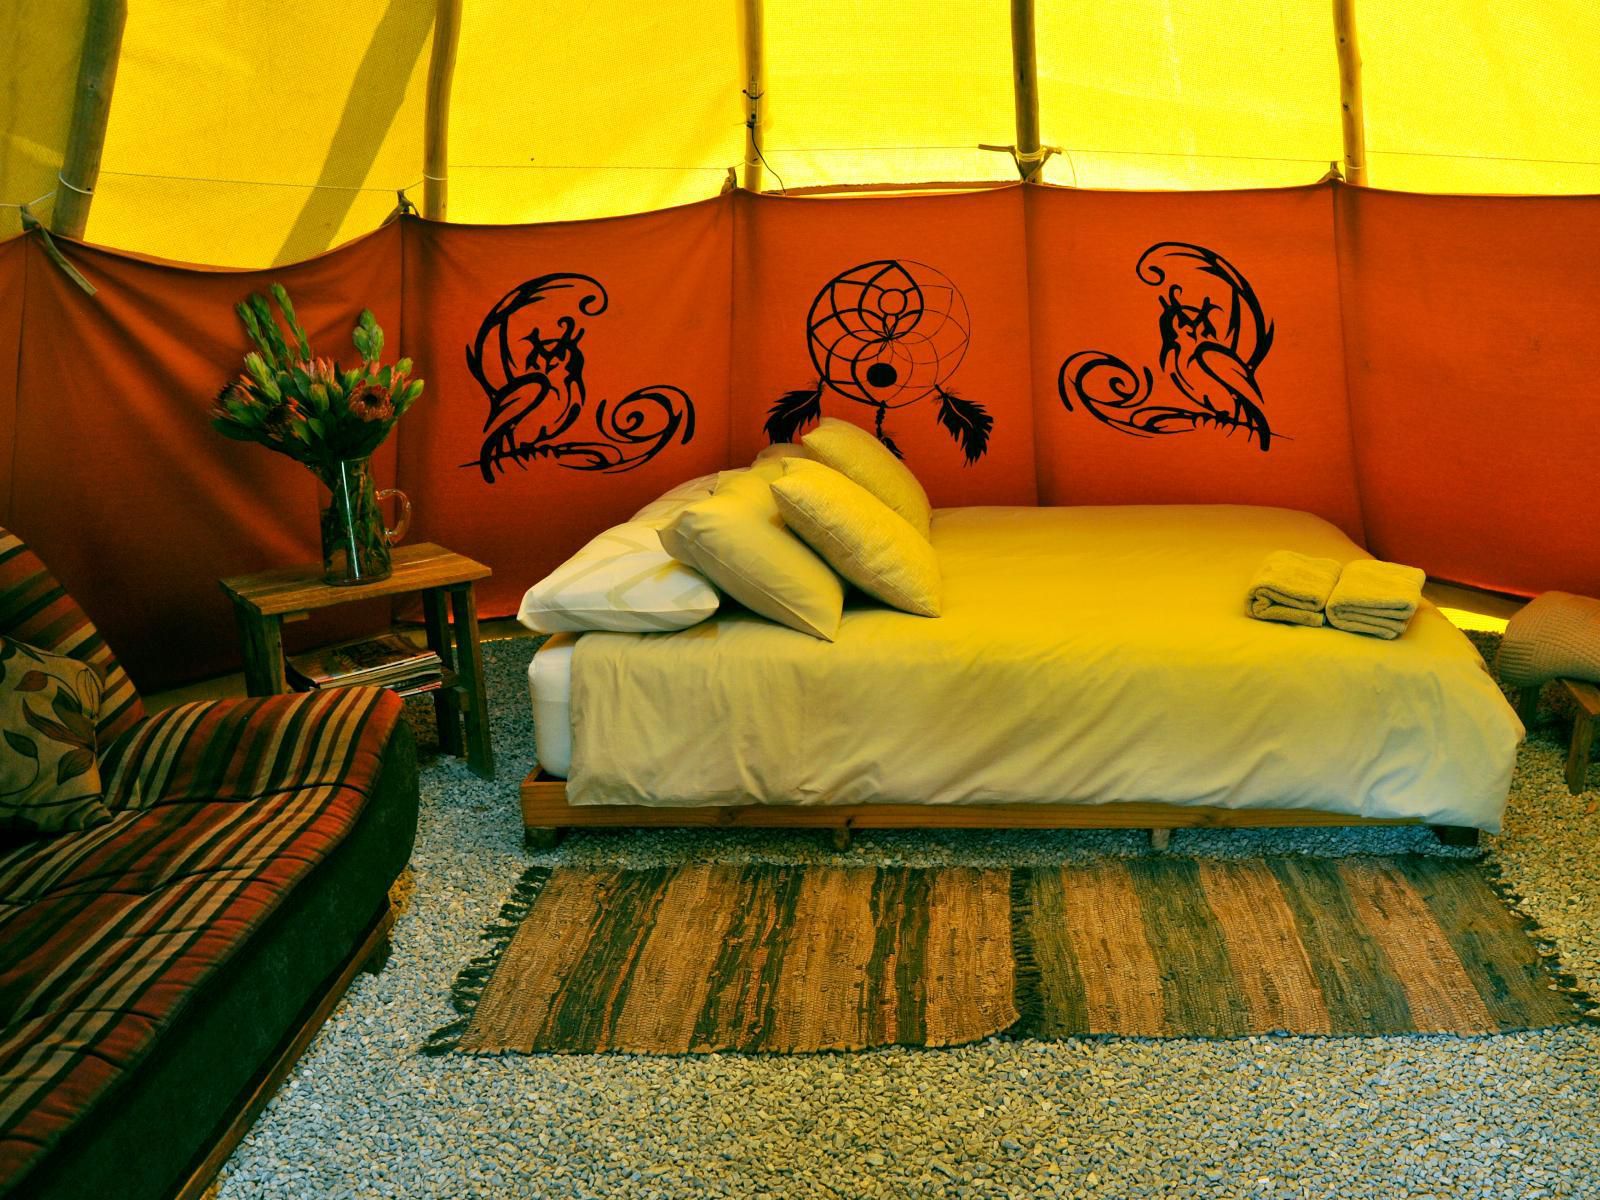 Lancewood Tipi Lodge Assegai Rest Robertson Western Cape South Africa Colorful, Bedroom